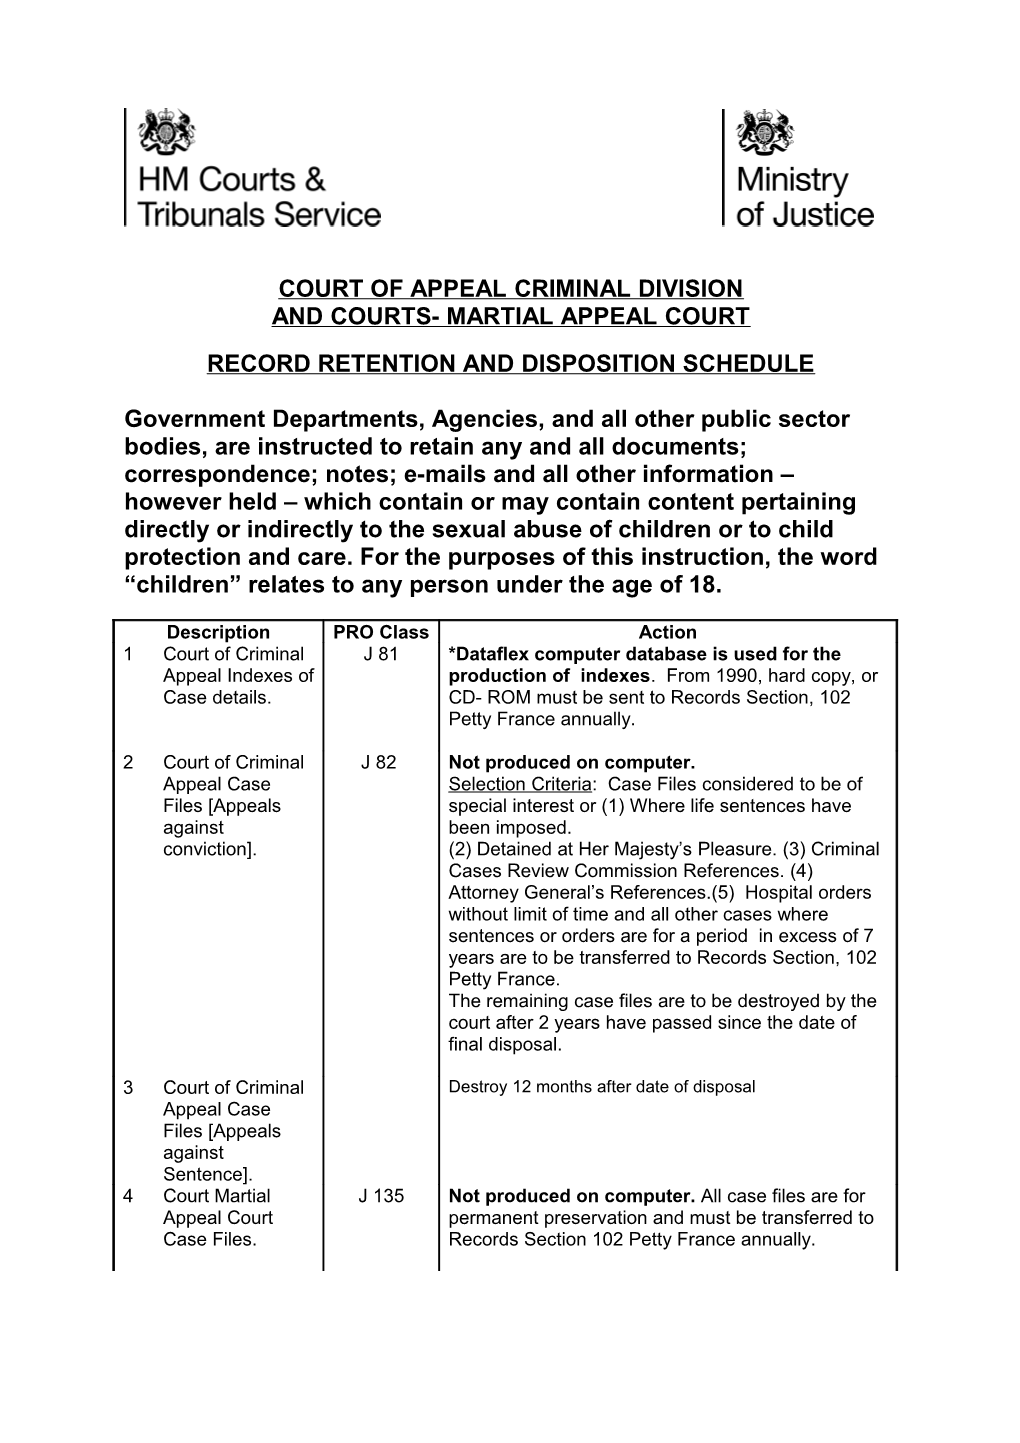 Court of Appeal Criminal Division and Courts- Martial Appeal Court RRDS